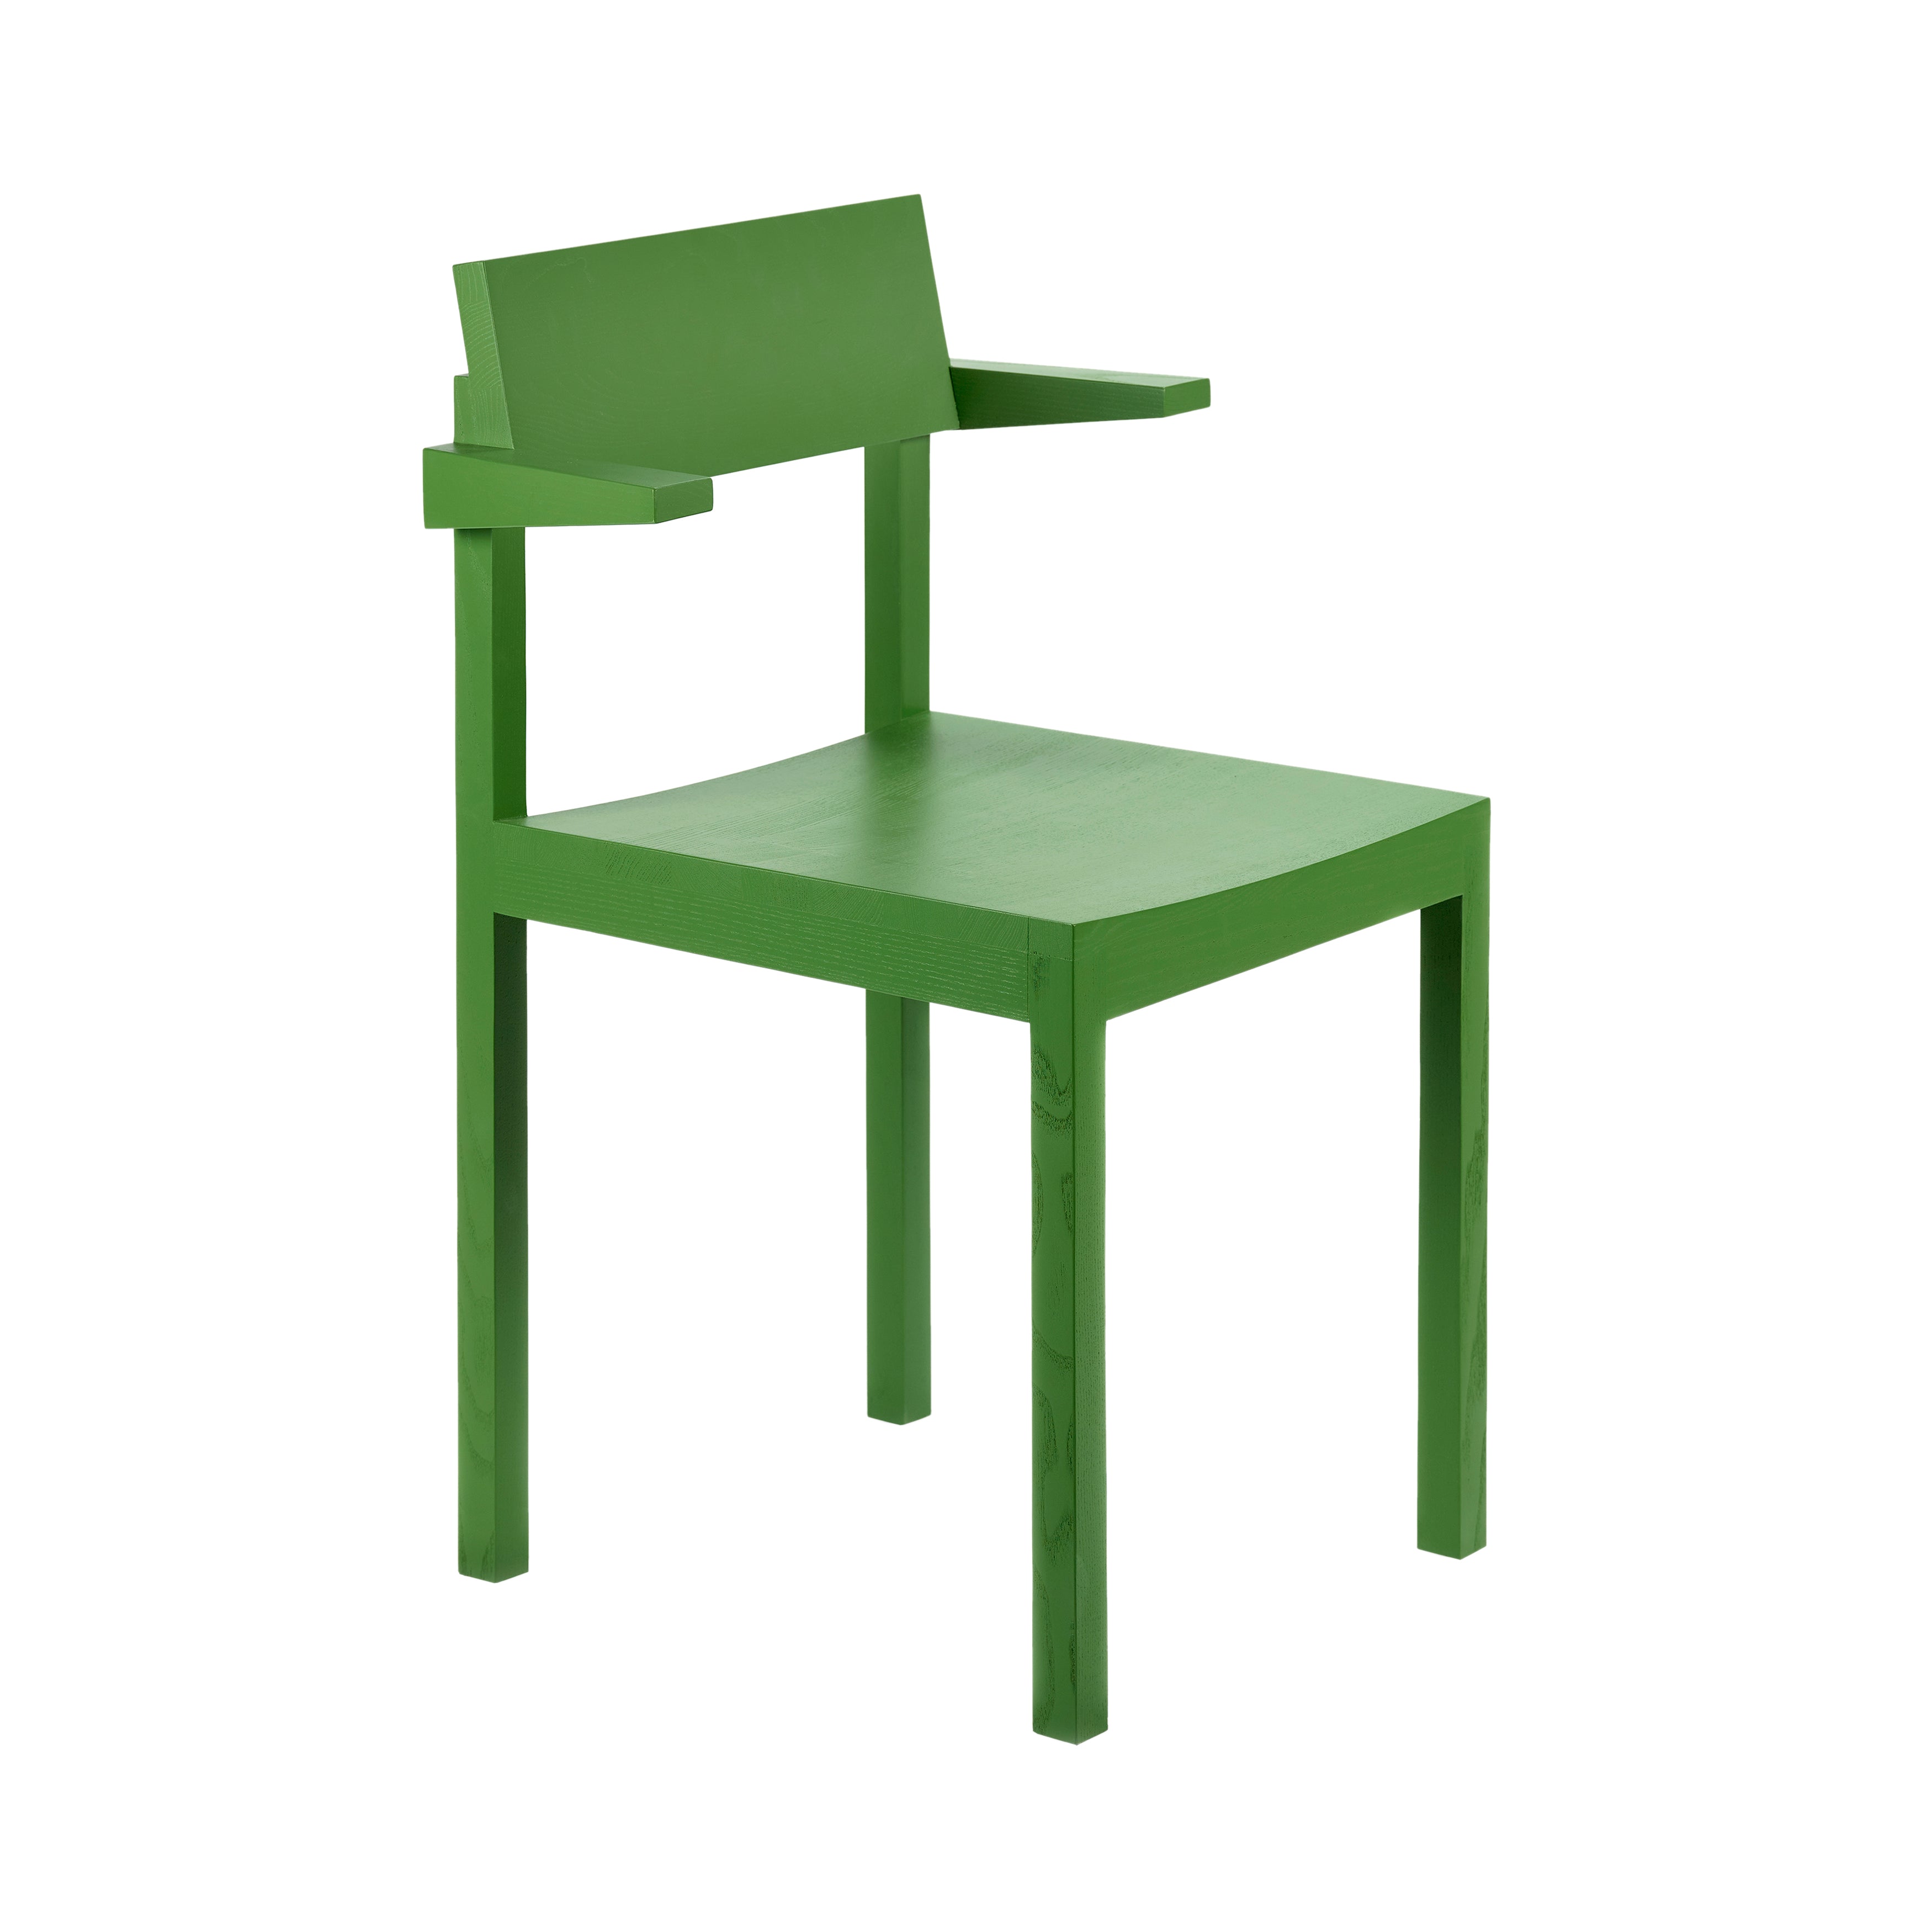 Silent Chair: With Arm + Grass